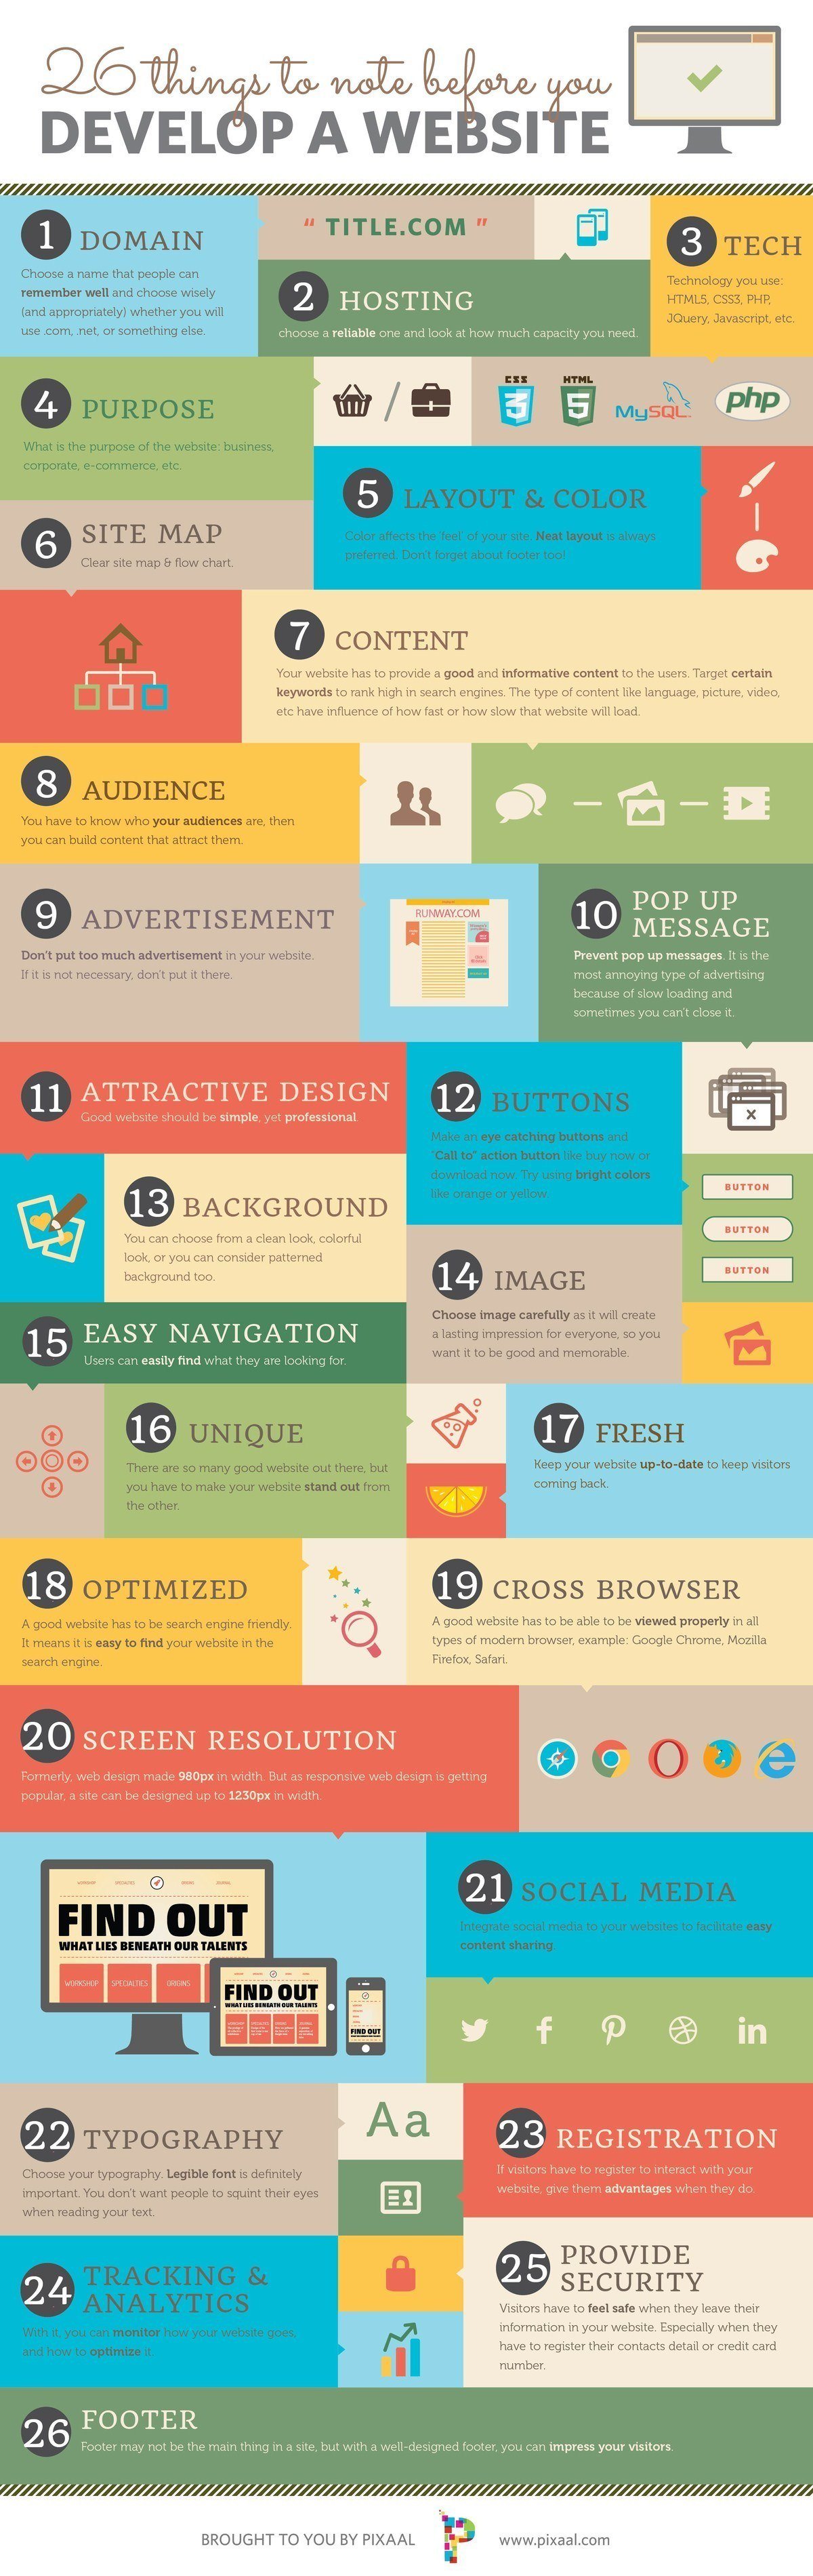 26 Things to Note Before You Develop a Website – Infographic